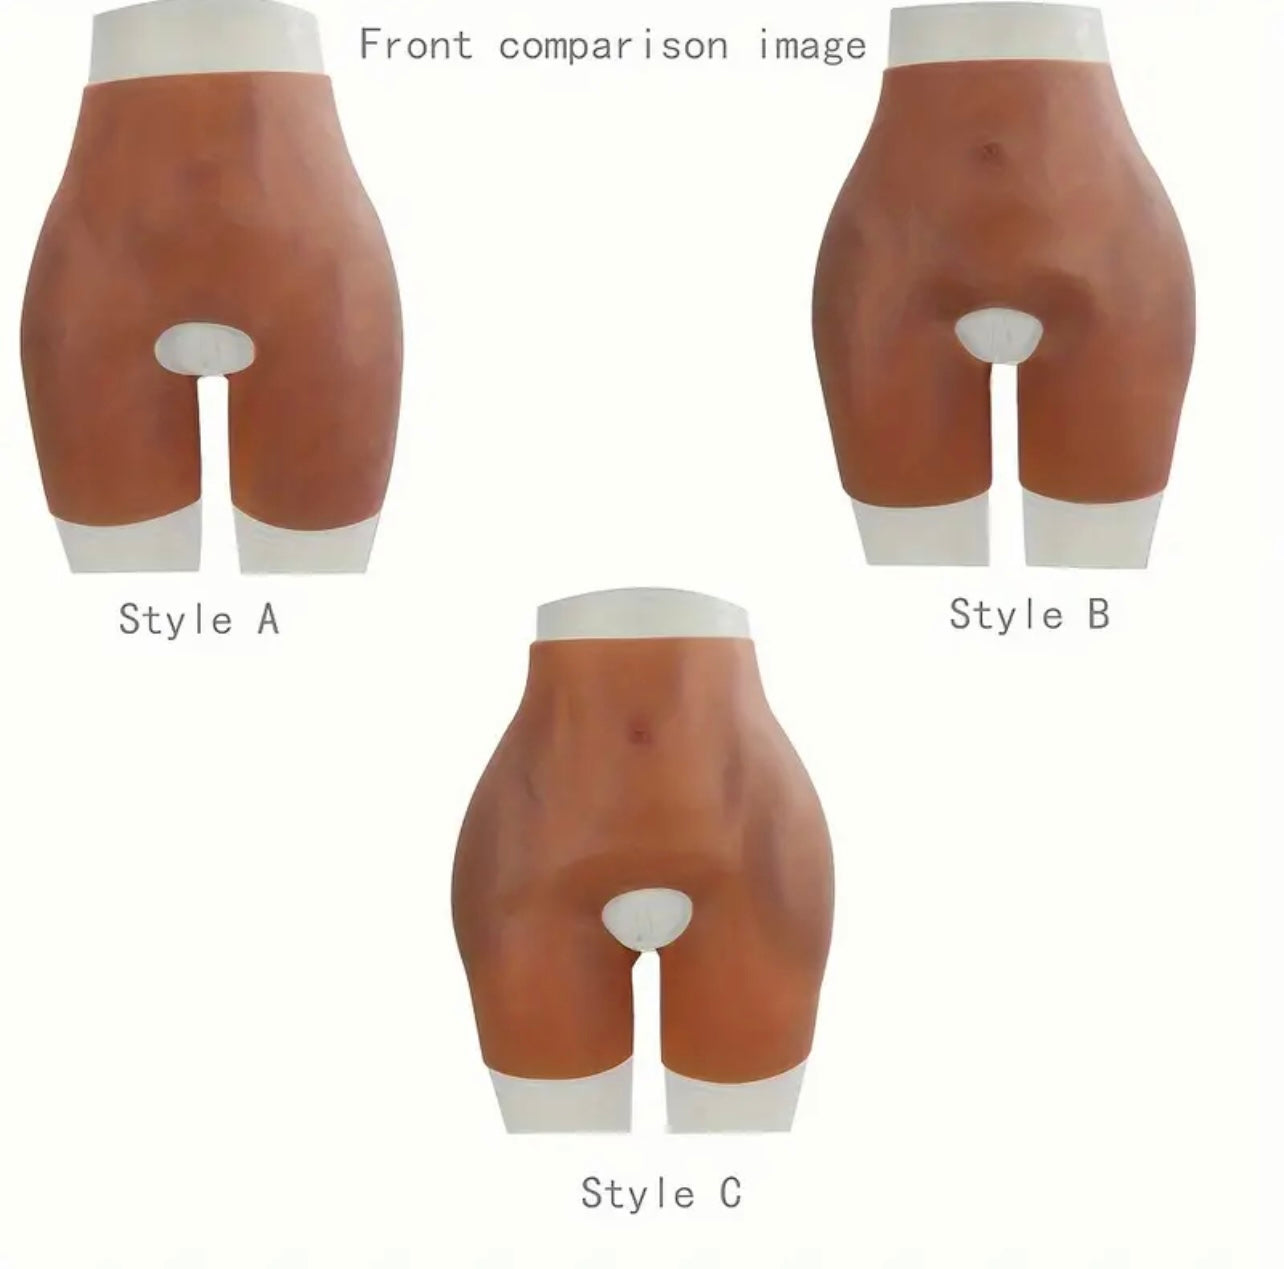 Silicone Body Shaping Butt Lifting Prosthetic Undergarment- Reusable